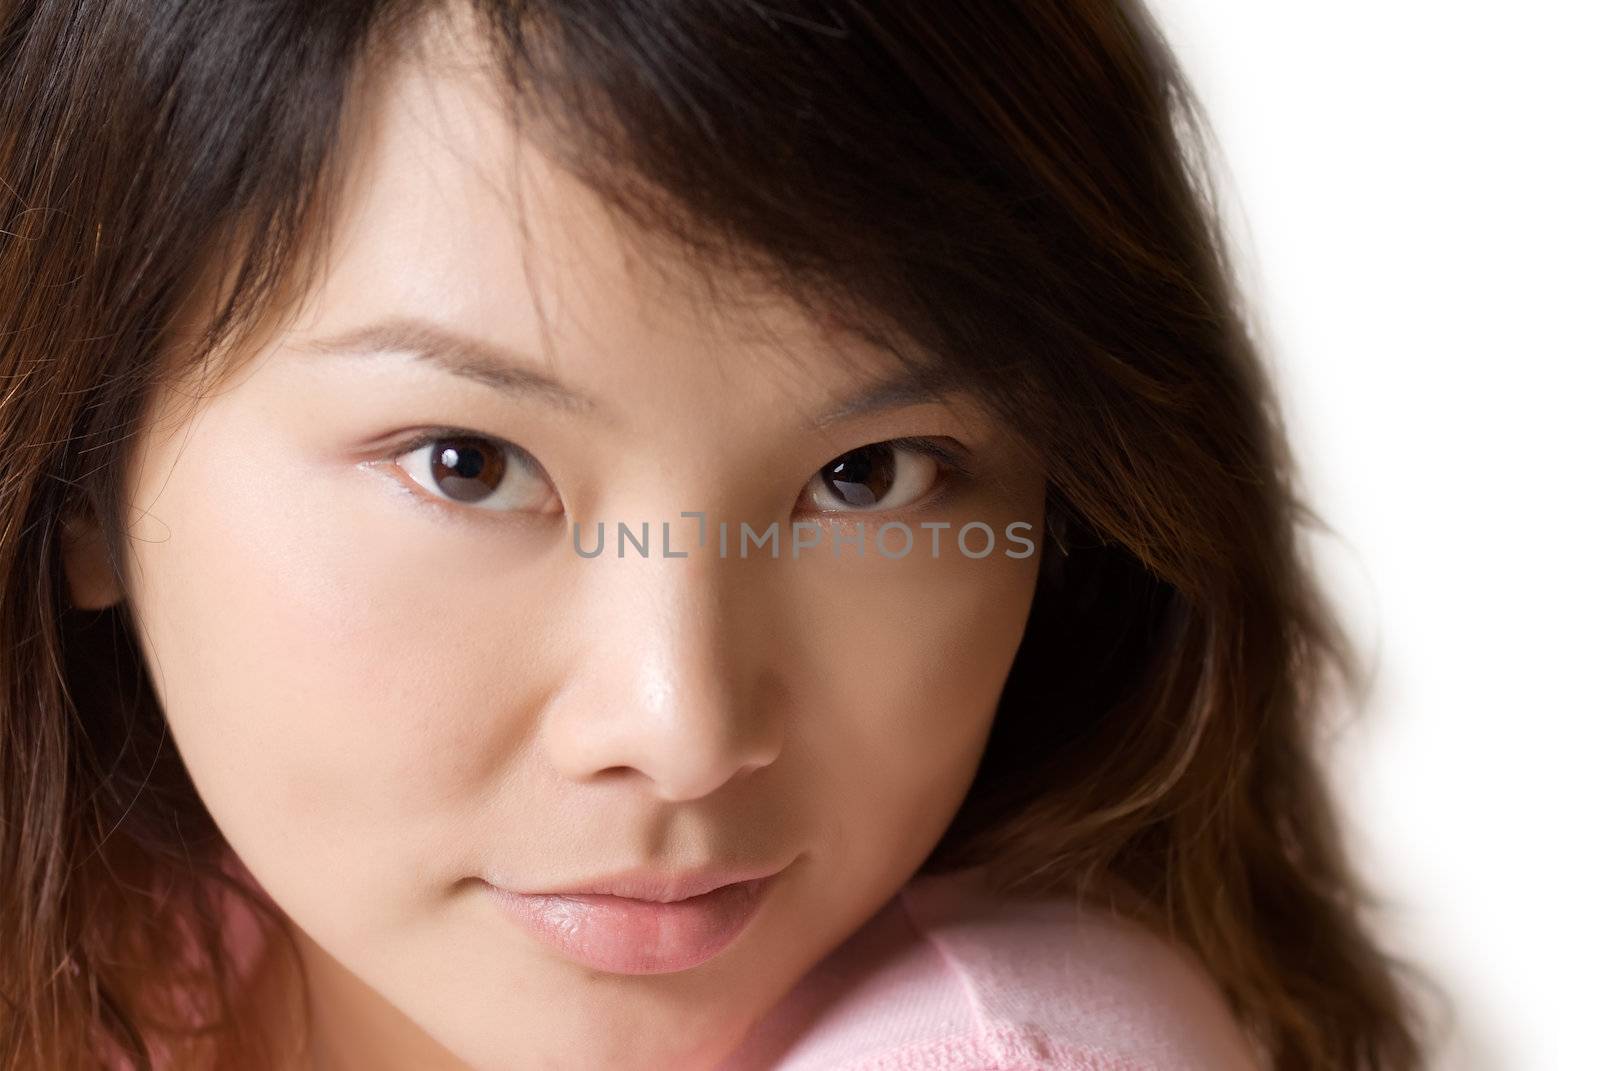 Woman gaze of Asian, attractive face and mysterious expression.